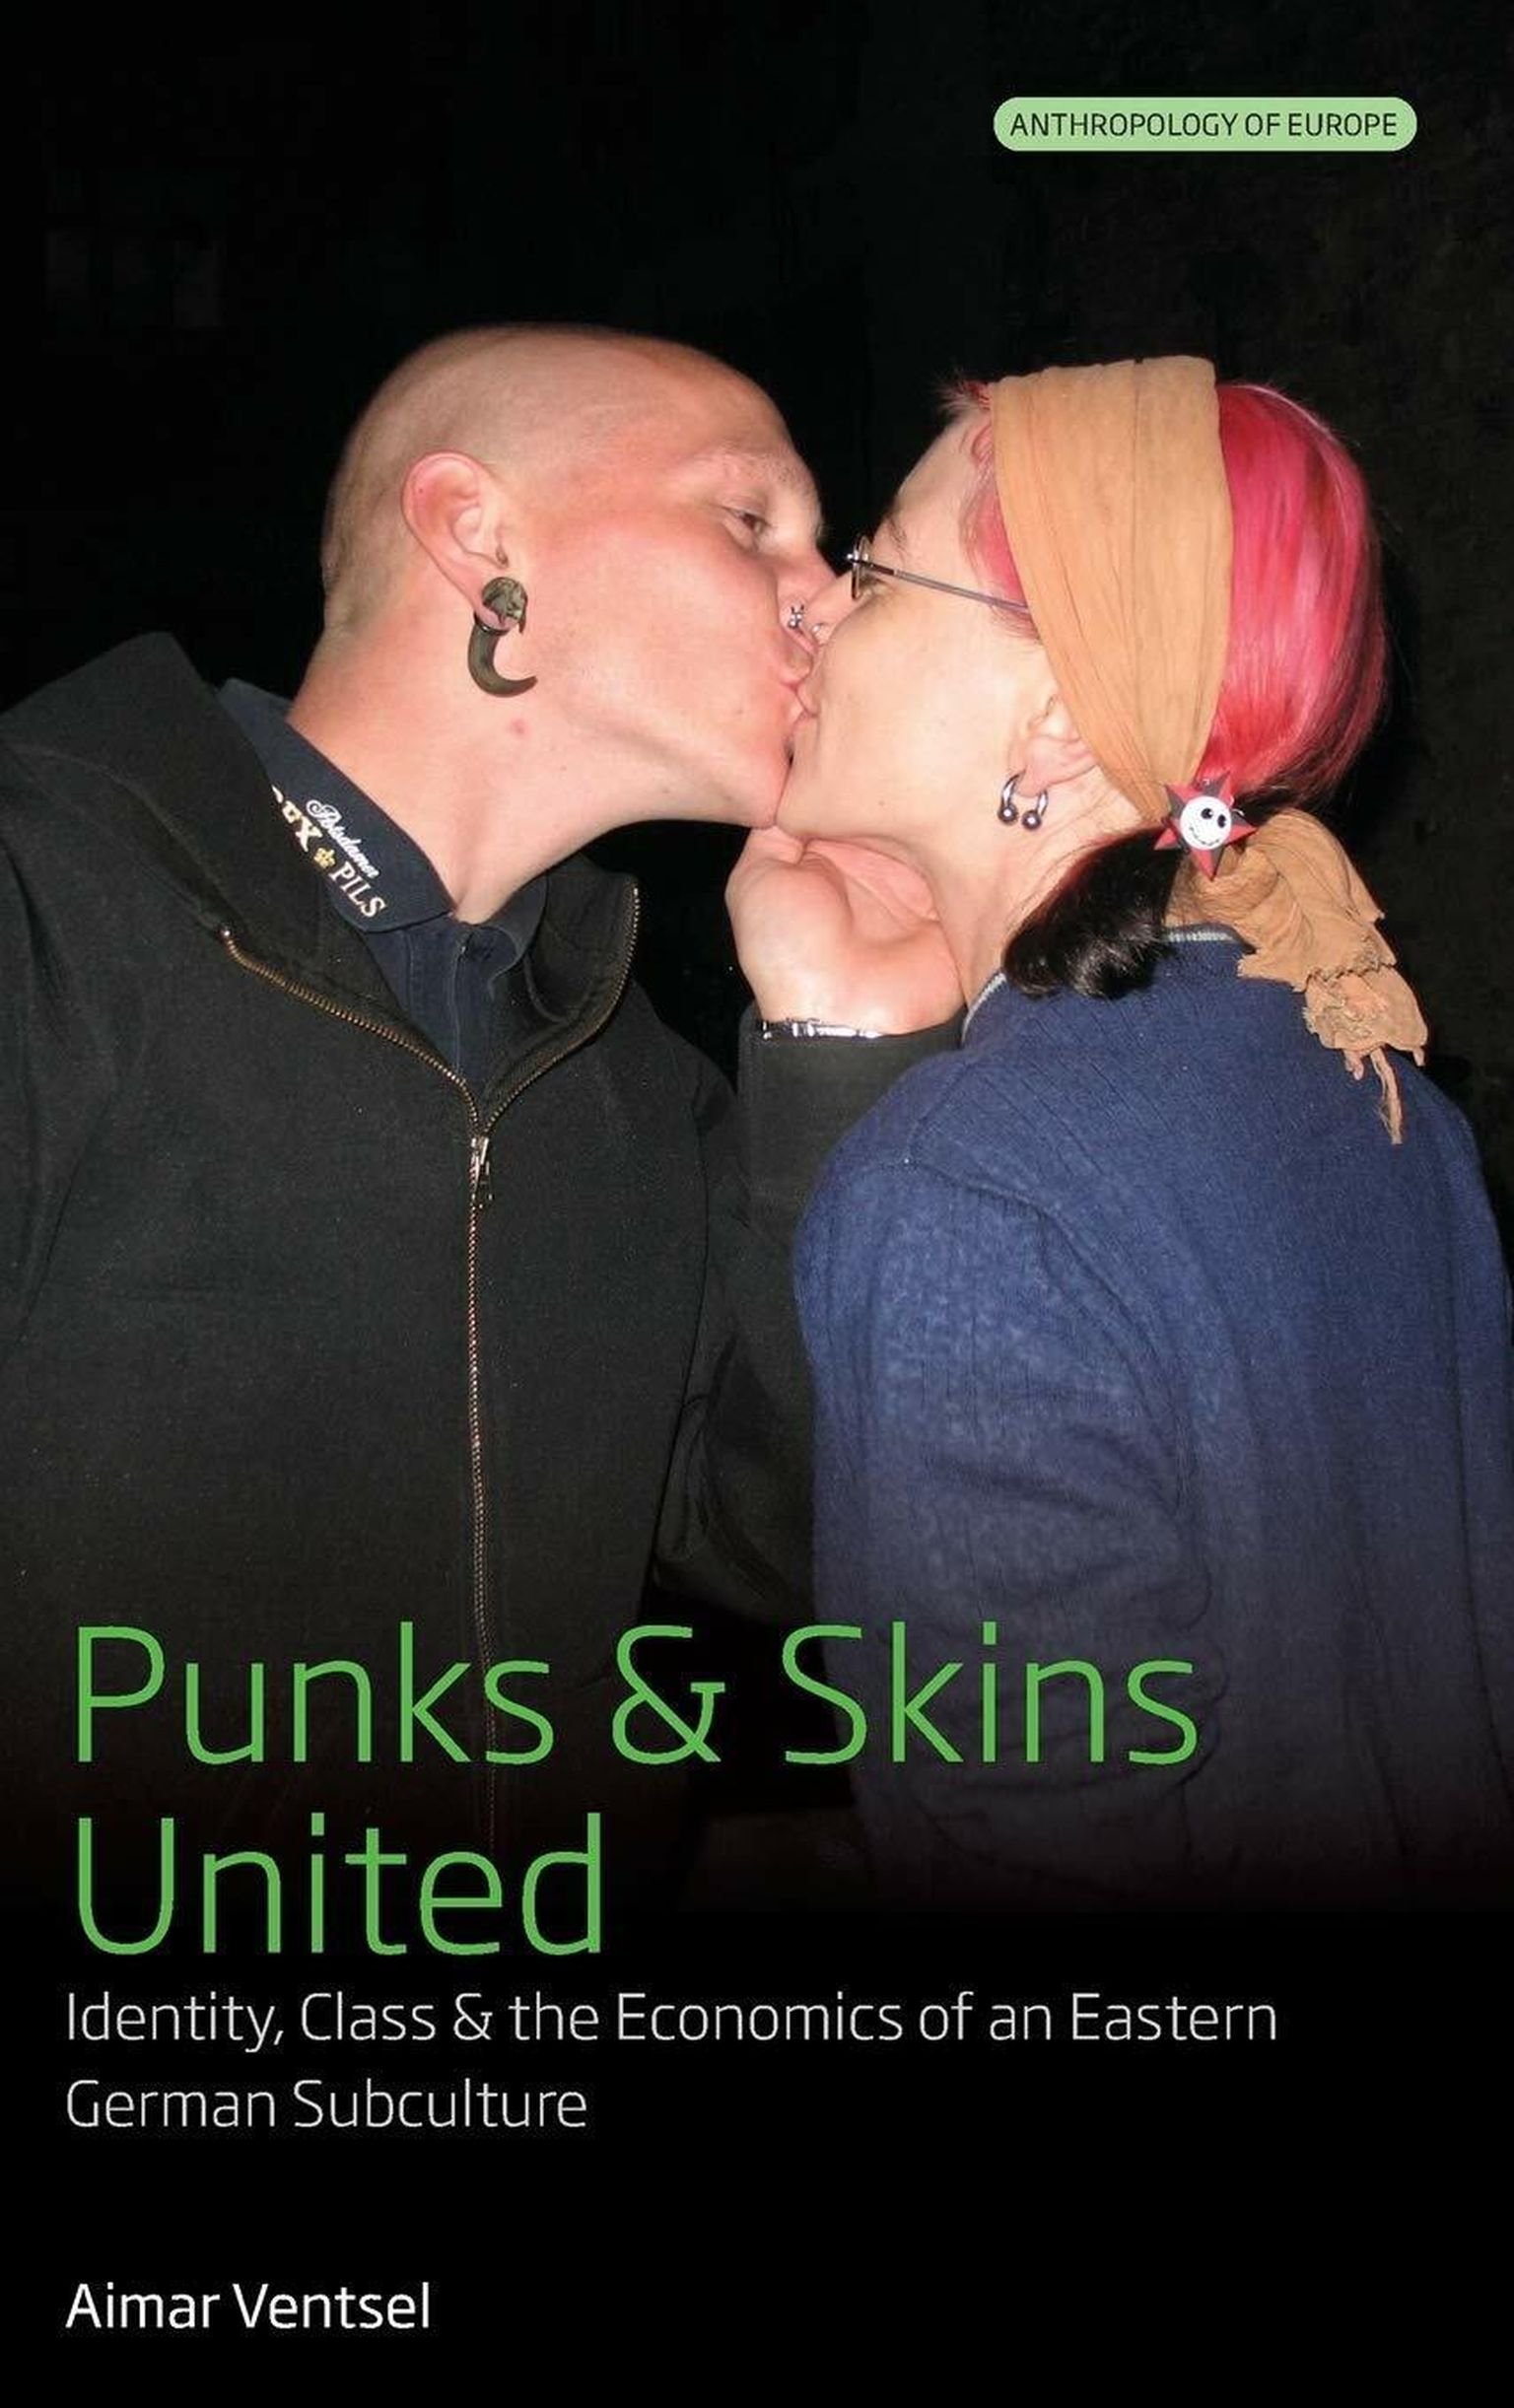 Aimar Ventsel, «Punks and Skins United: Identity, Class and the Economics of an Eastern German Subculture».